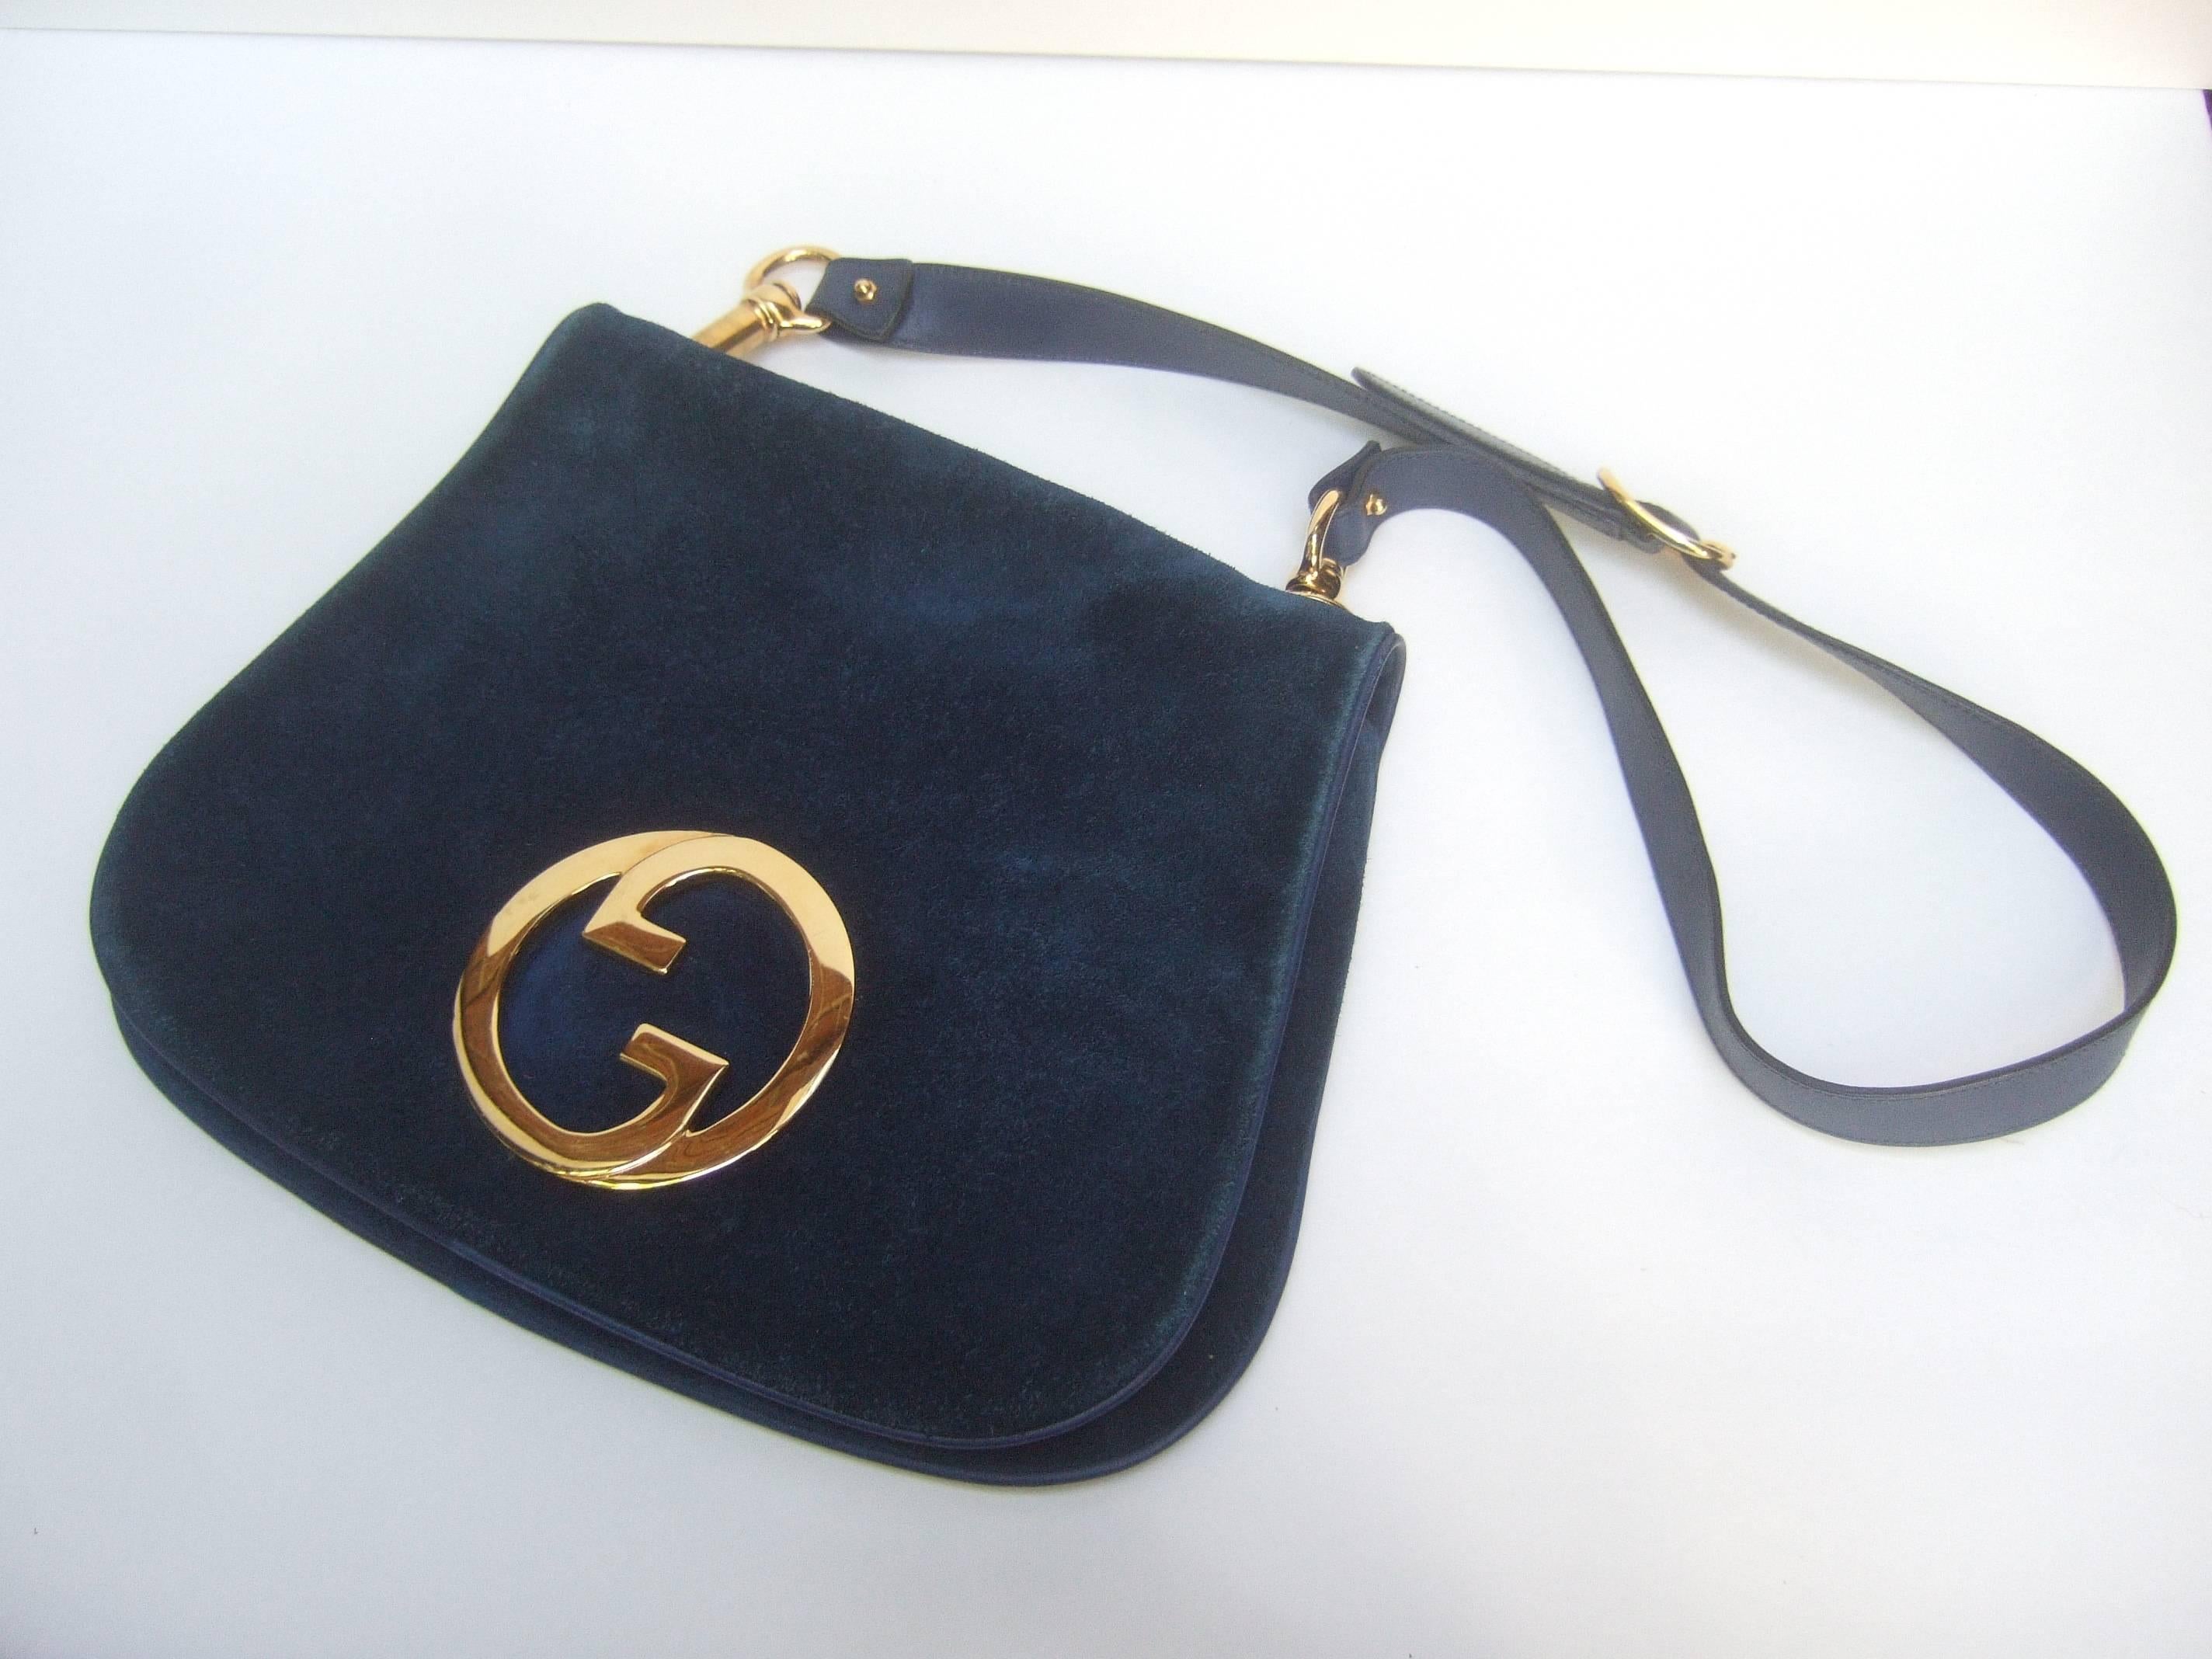 Women's Gucci Italy Rare Midnight Blue Suede Shoulder Bag c 1970s